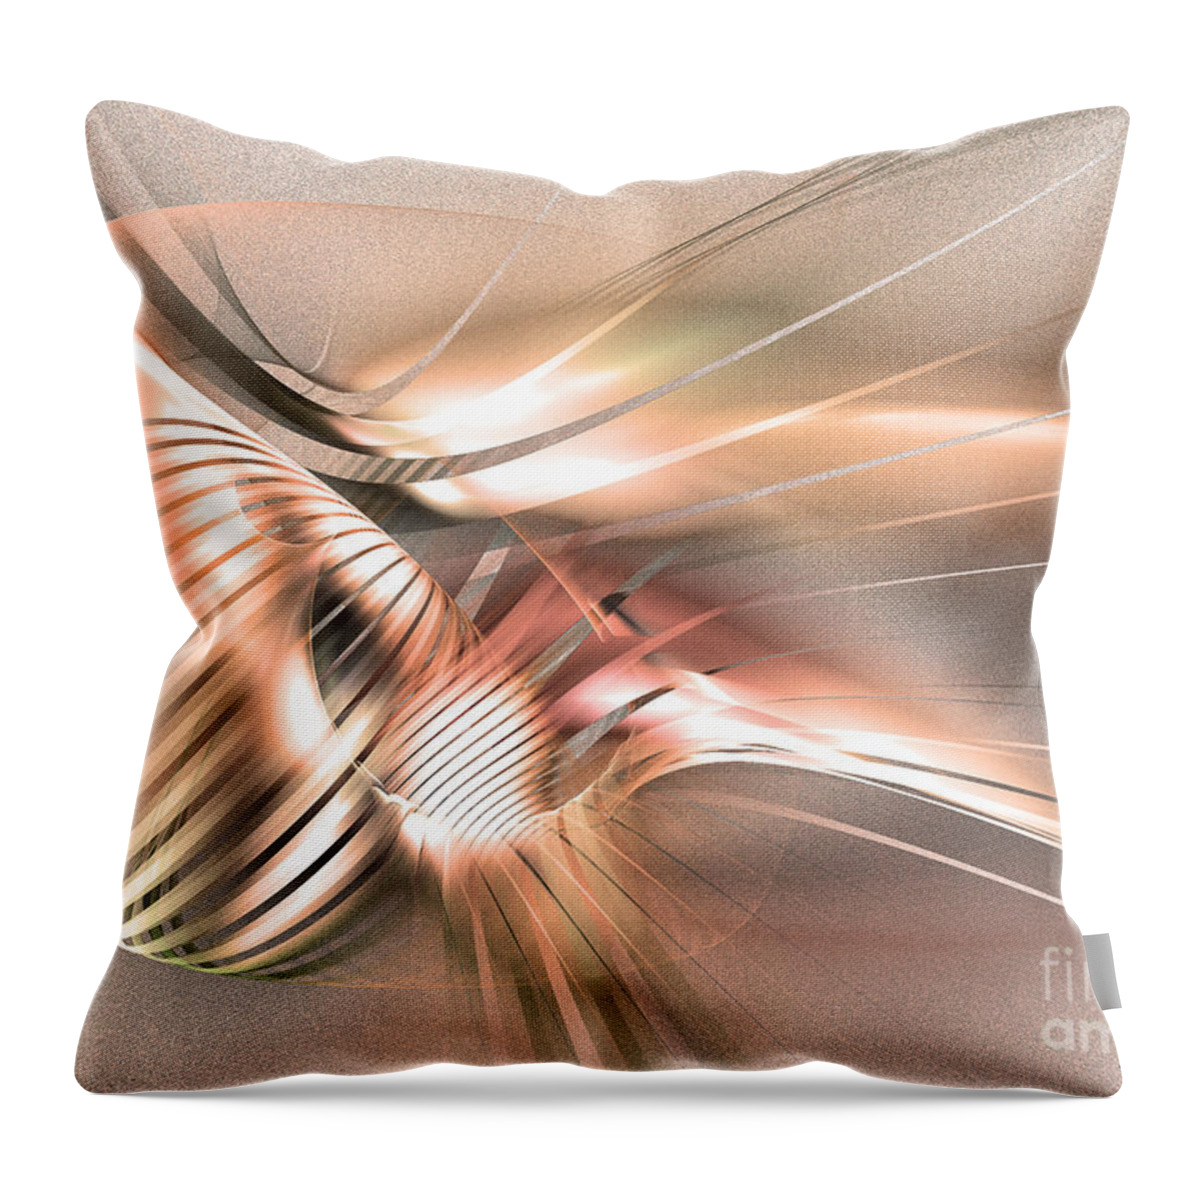 Art Throw Pillow featuring the digital art Found by Nile - Abstract art by Sipo Liimatainen